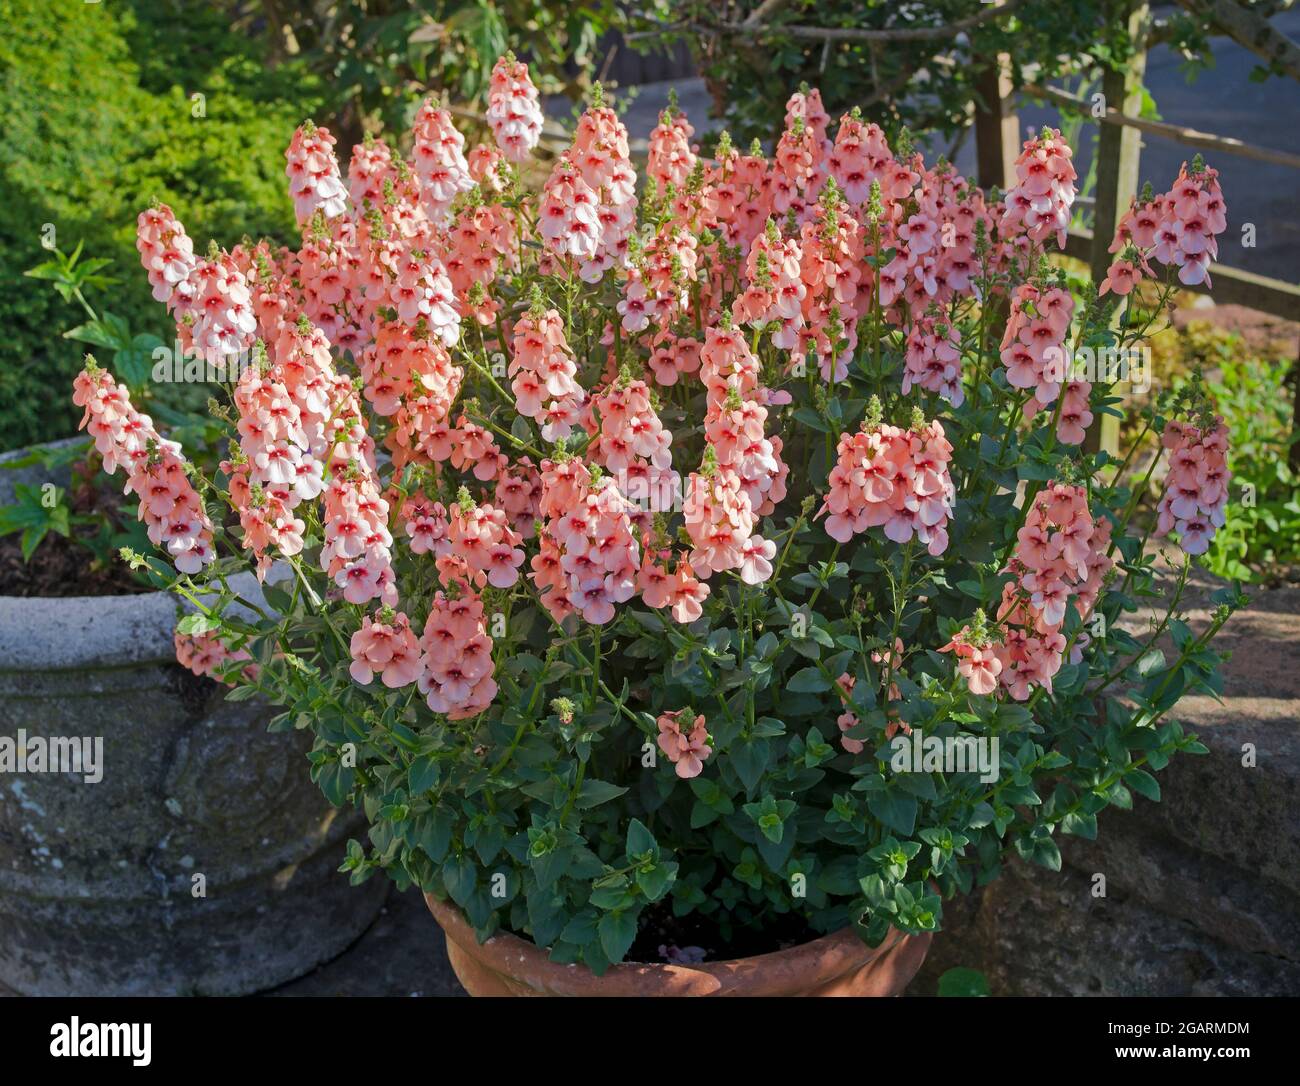 Half-hardy annual Diascia Aurora Apricot lit up by early morning sunshine in terracotta pot on patio in English summer garden Stock Photo